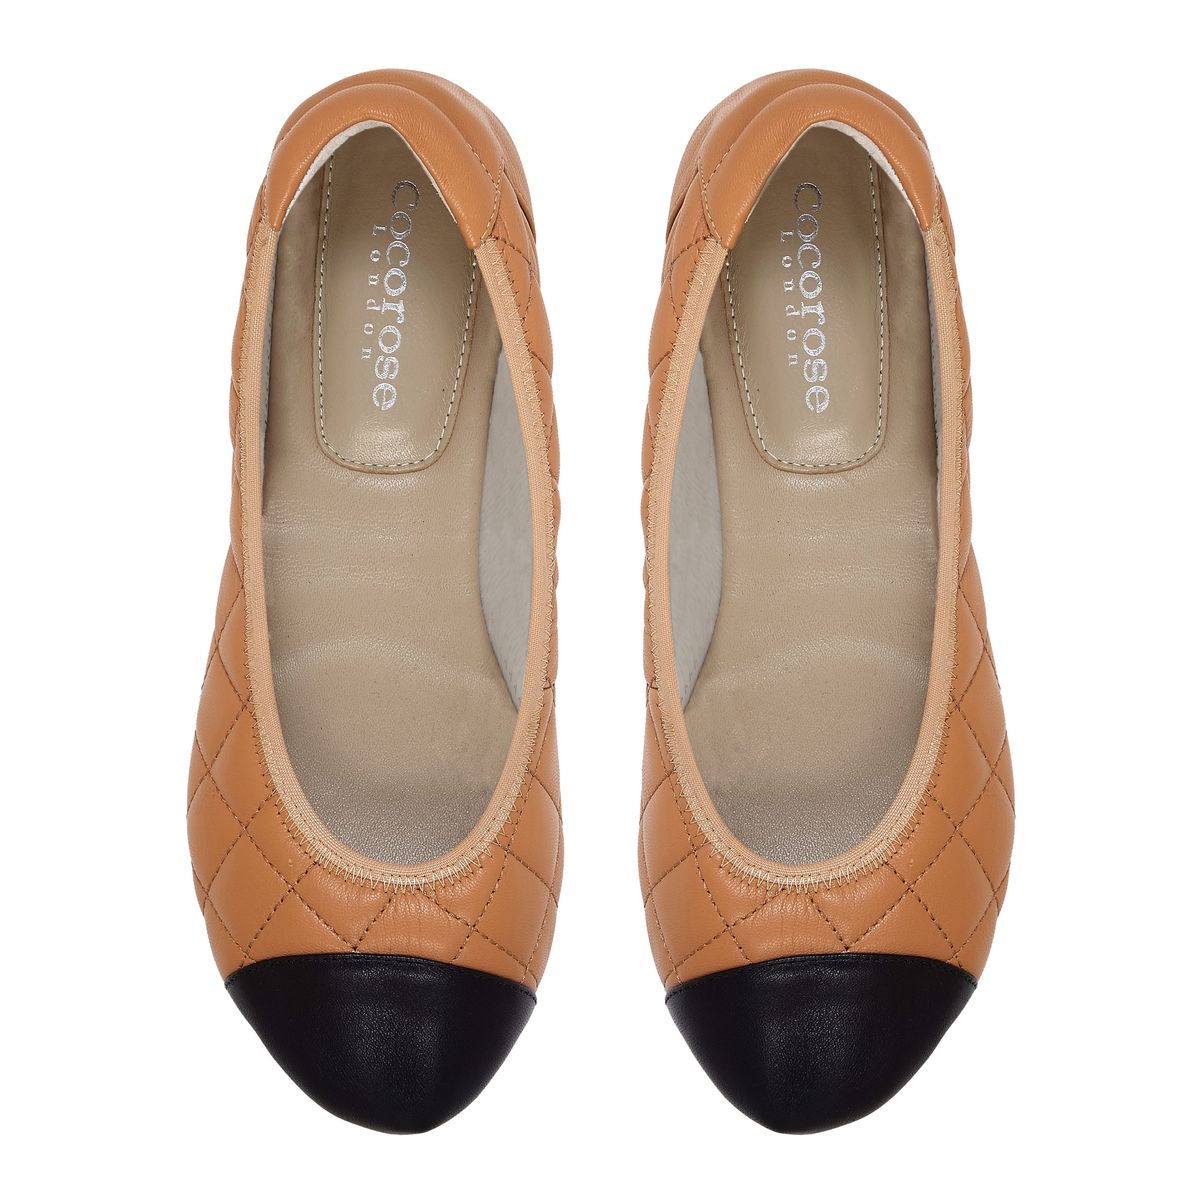 Tan quilted leather 'Piccadilly' ballerinas  from www.cocoroselondon.com 